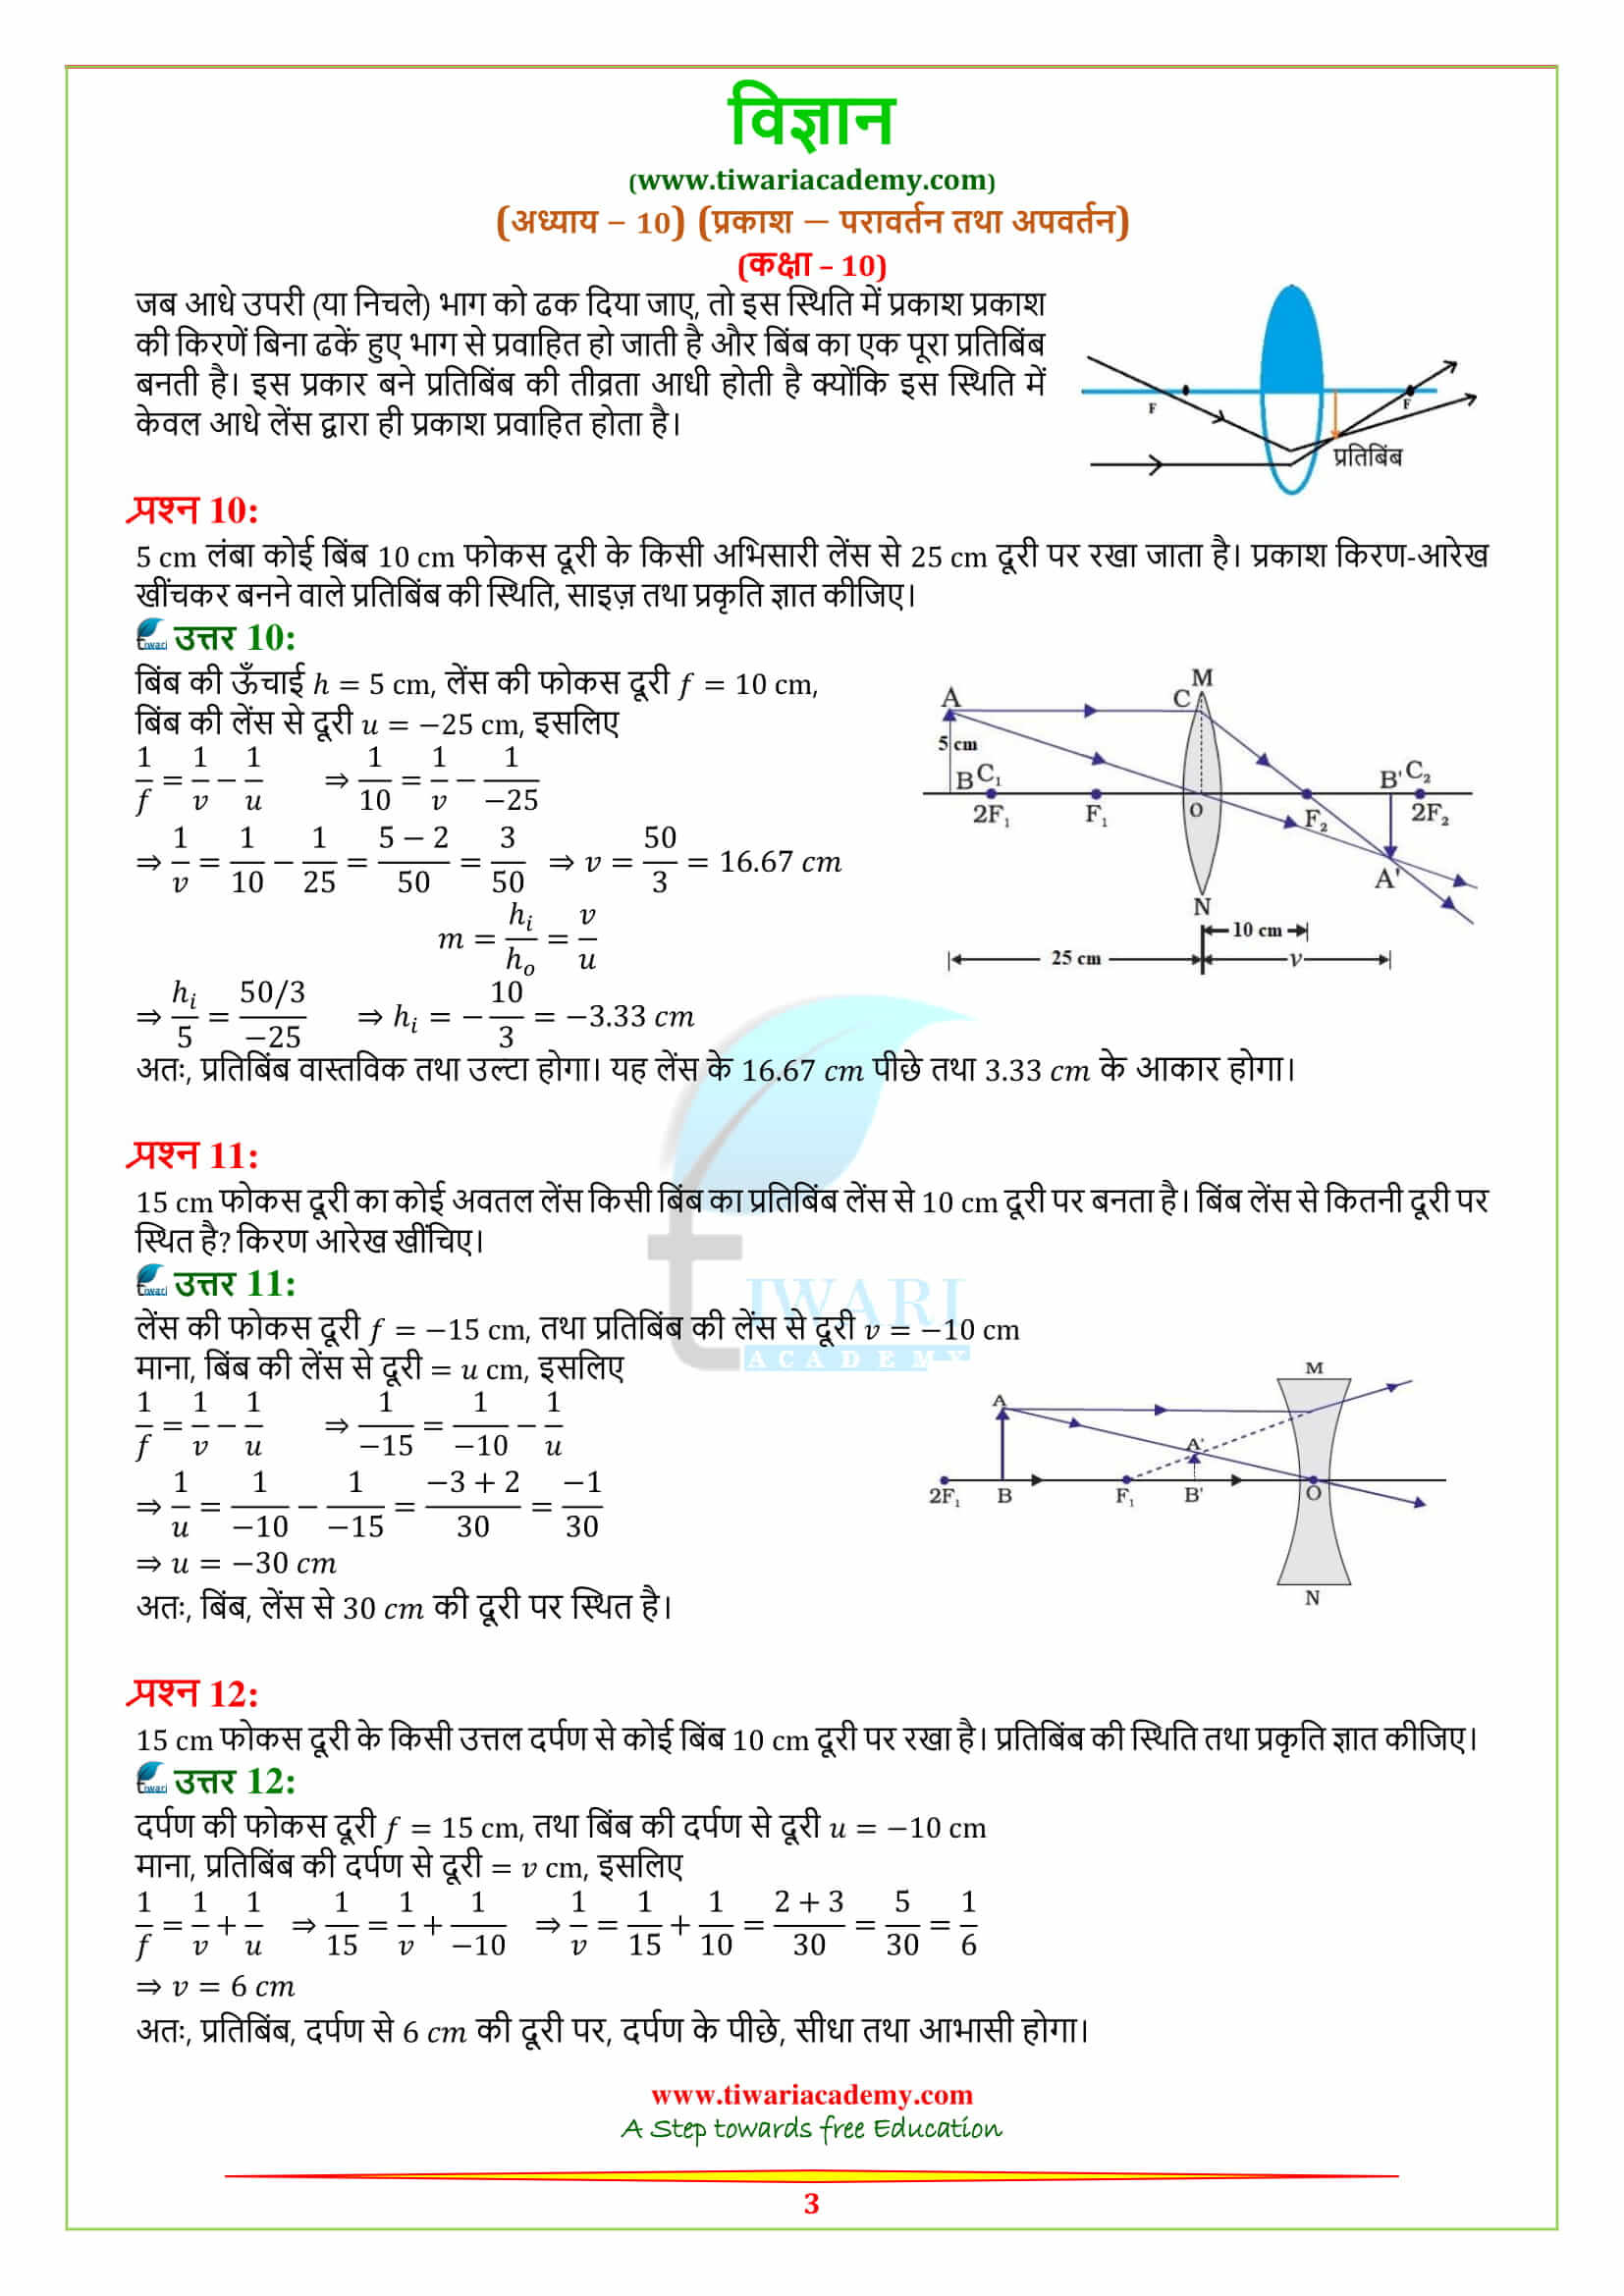 NCERT Solutions for Class 10 Science Chapter 10 all answers in hindi